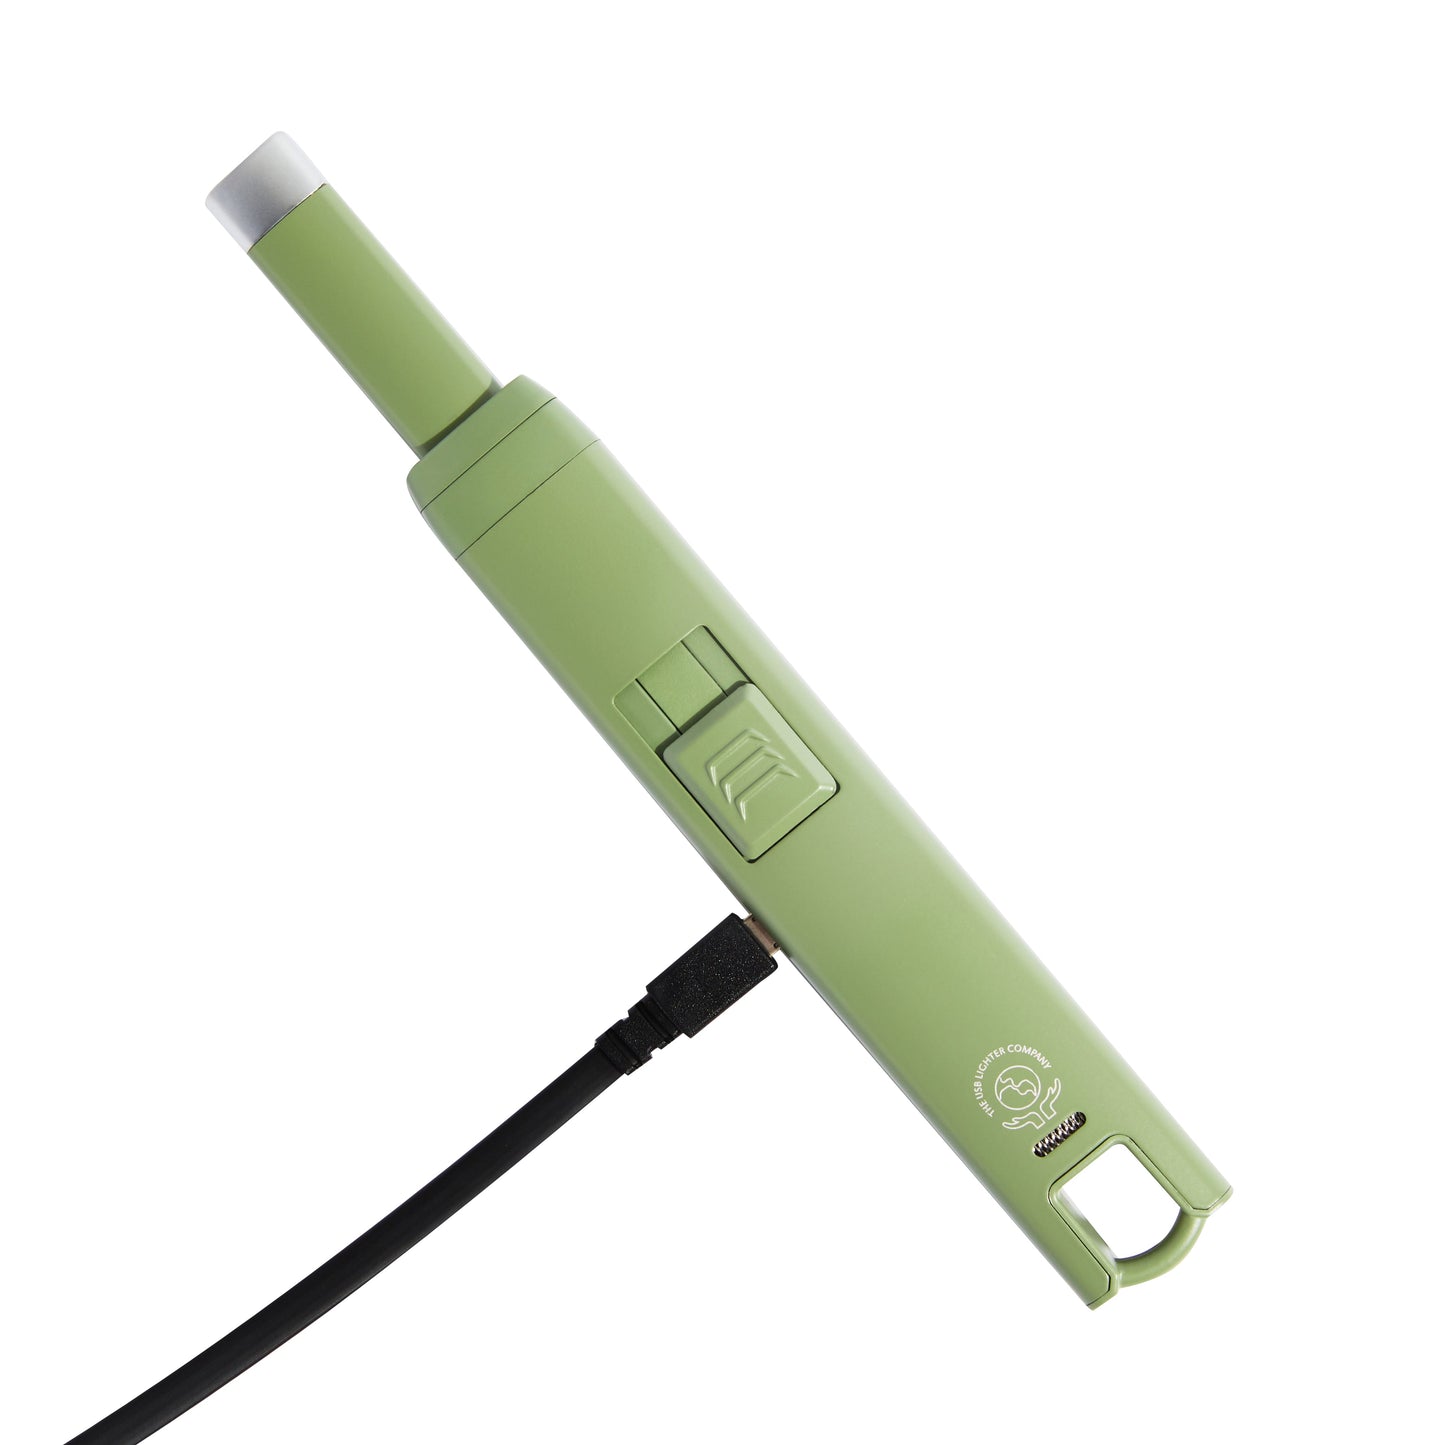 Candle Lighter - Olive Green by The USB Lighter Company